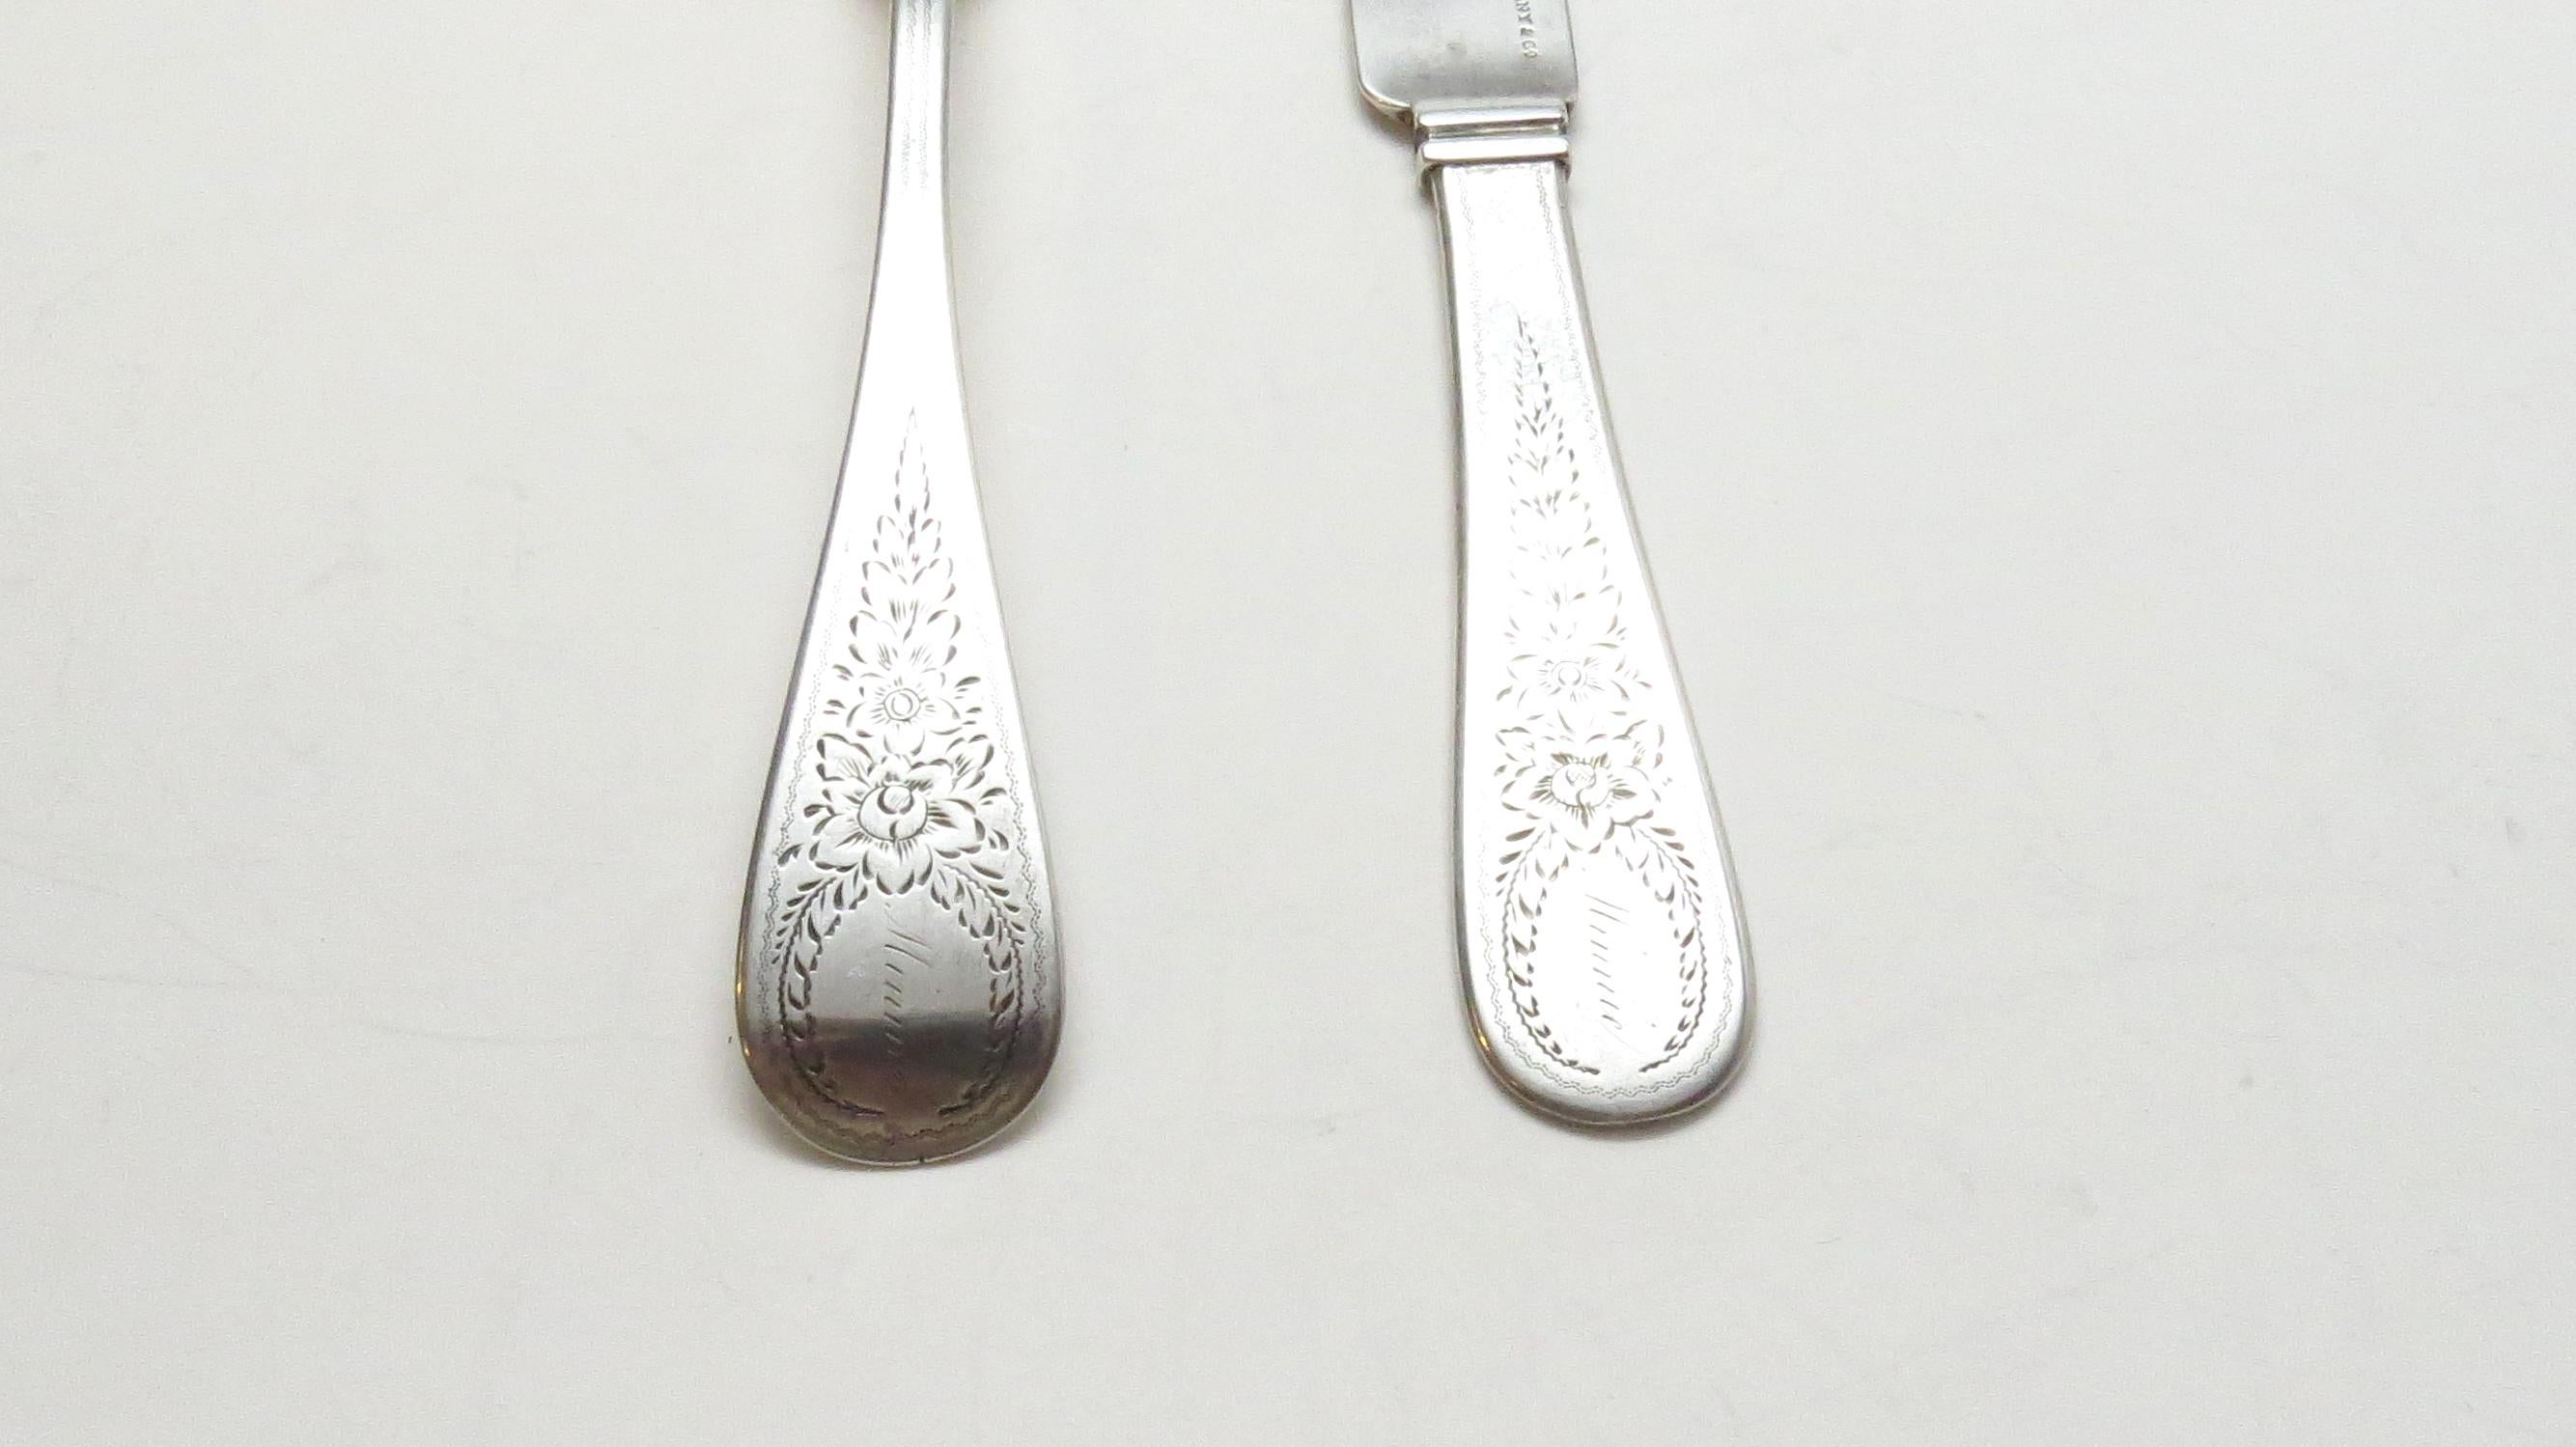 John Polhamus for Tiffany & Co. Sterling silver spoon and knife. 
Marked: TIFFANY & CO., J*P, STERLING. 
Engraved: Minnie. 
Flat solid knife: 7 1/2